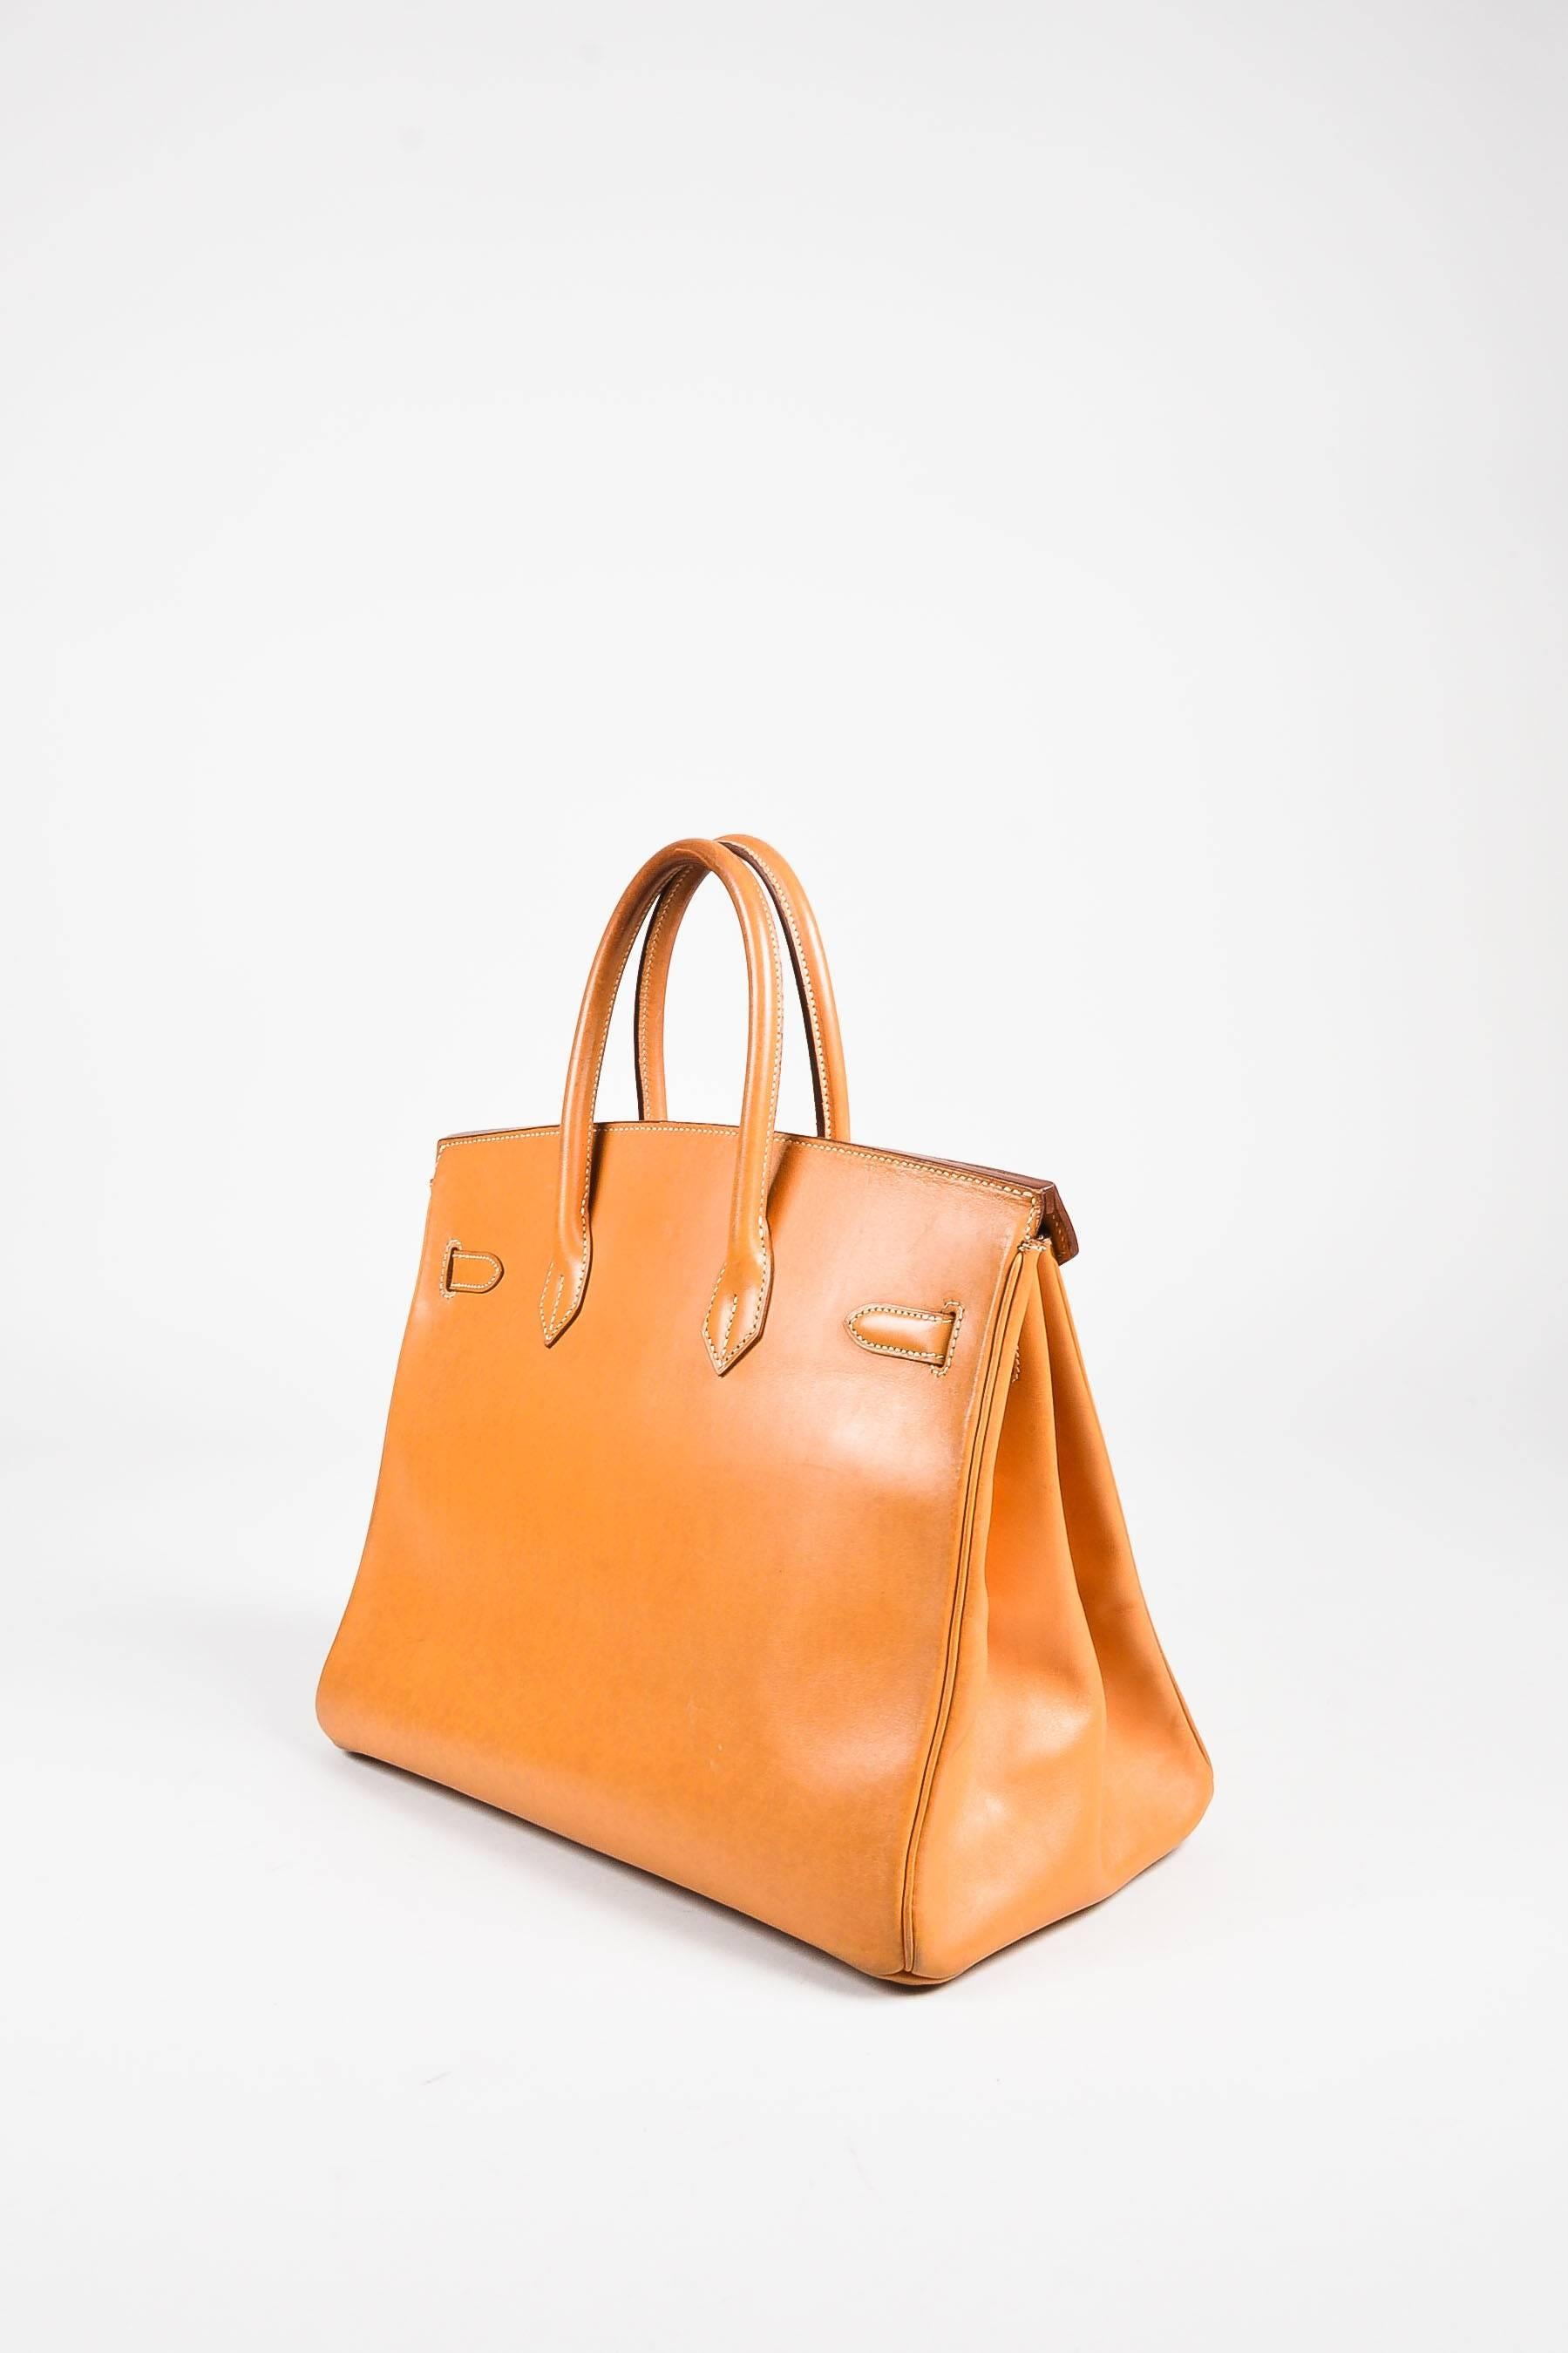 Released circa 1995, as signified by a blind stamp 'Y' in a circle. An elegant piece of iconography, the coveted 35cm "Birkin" satchel bag is constructed of natural colored box calf leather. Features sturdy dual rolled top handles, tonal